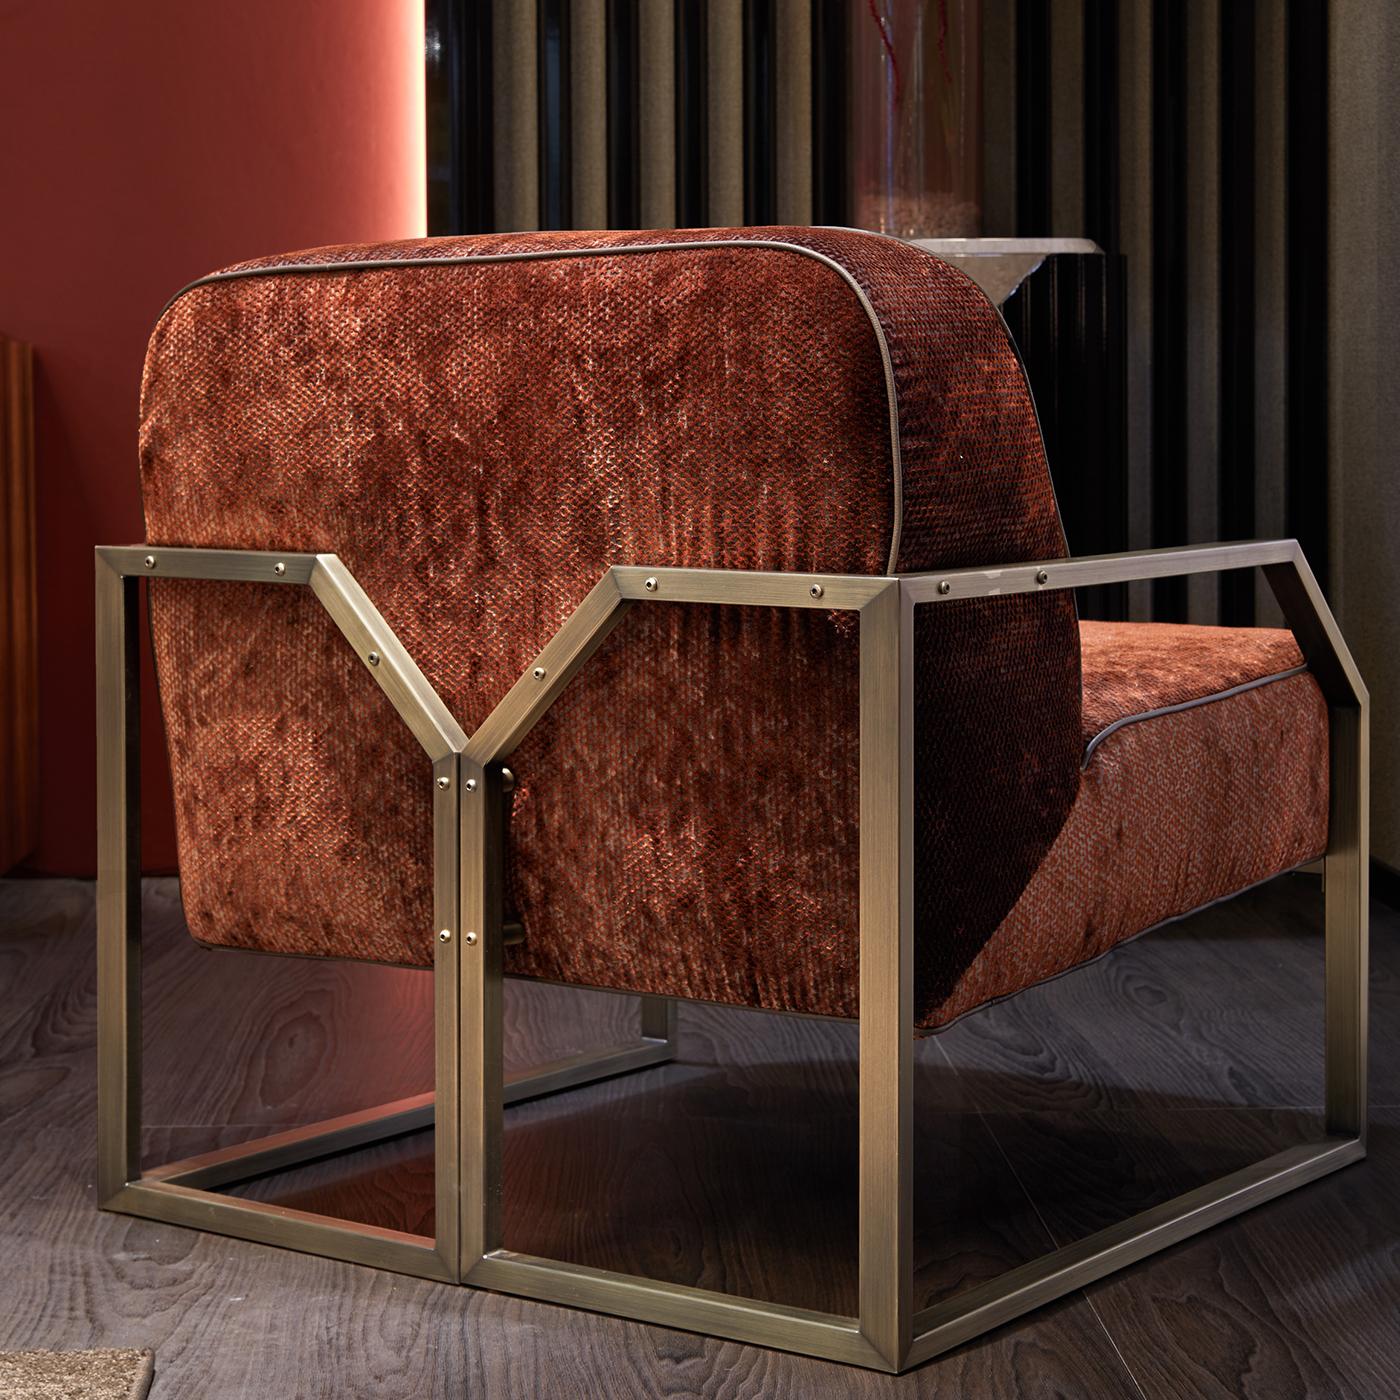 Create a sumptuous lounge atmosphere in a contemporary space with the Evie armchair. On a Minimalist base with a bronze finish, the chair is characterized by its deep and wide seat, inviting you in for a cozy evening. The plush armchair can be